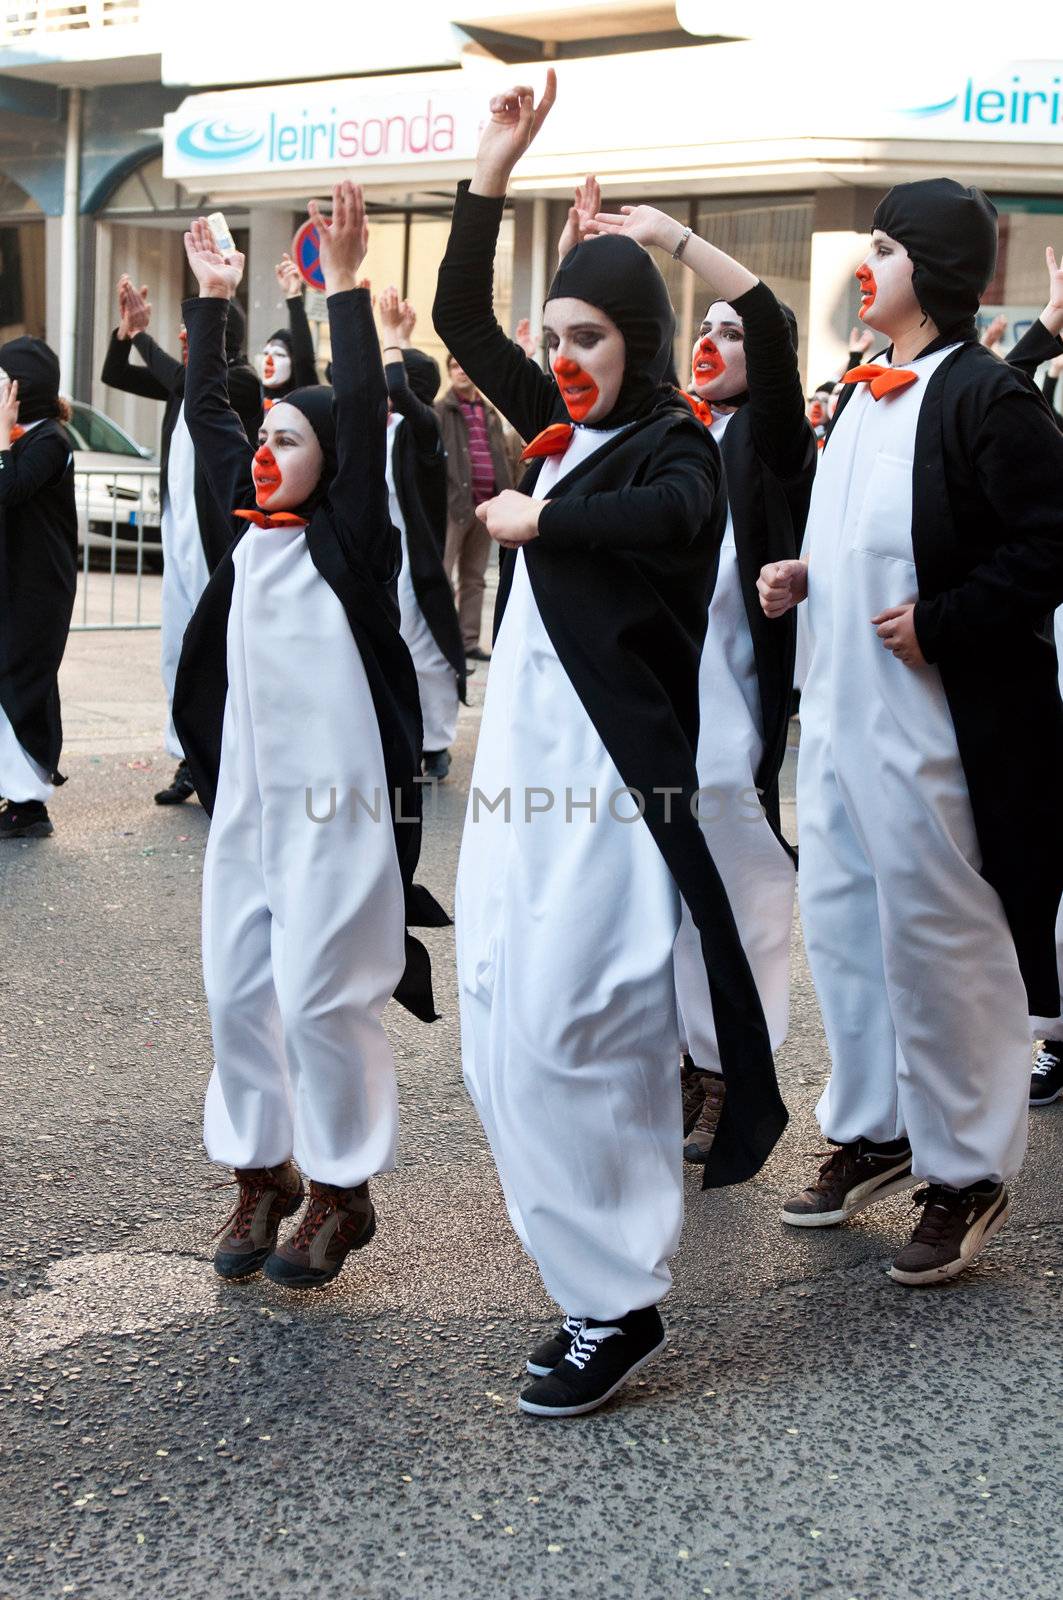 OUREM, PORTUGAL - FEBRUARY 19: unidentified people perform at the Carnival Parade on February 19, 2012 in Ourem, Portugal. The Annual Parade was held during the afternoon of February 19th 2012.